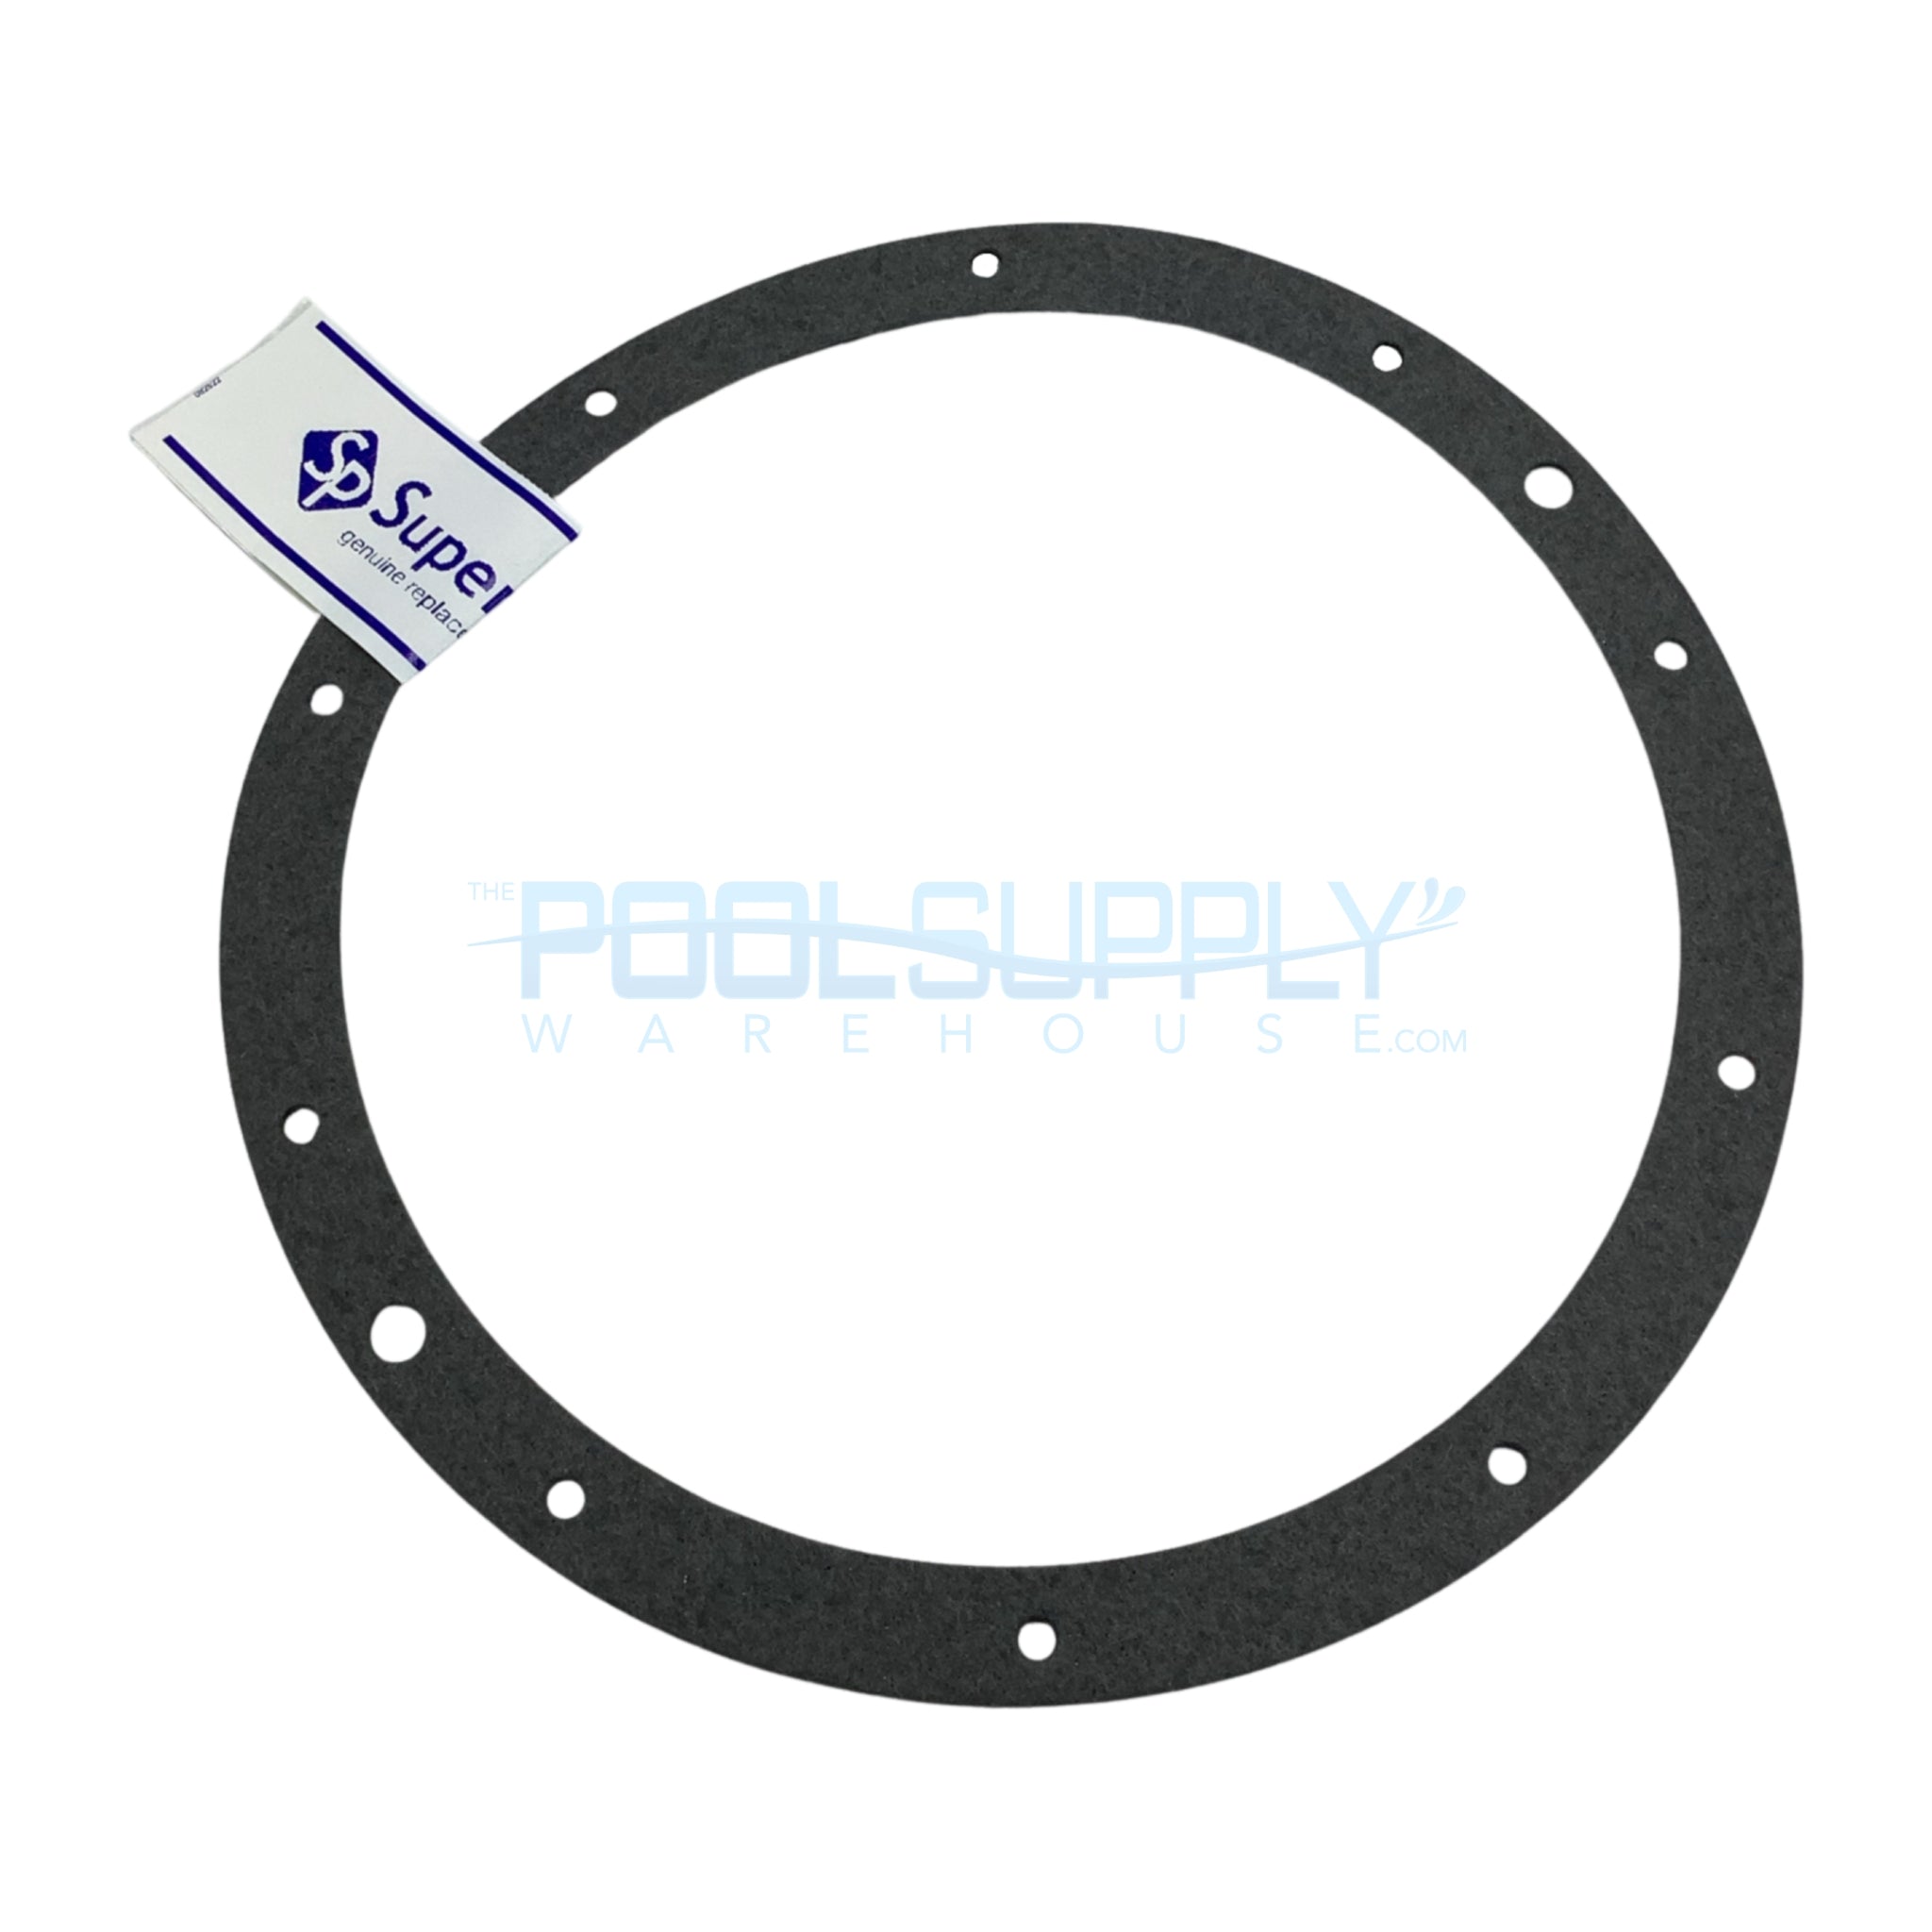 Super-Pro Gasket for Niche Standard 10 Holes; ABS, Paper - G-110P-9 - The Pool Supply Warehouse